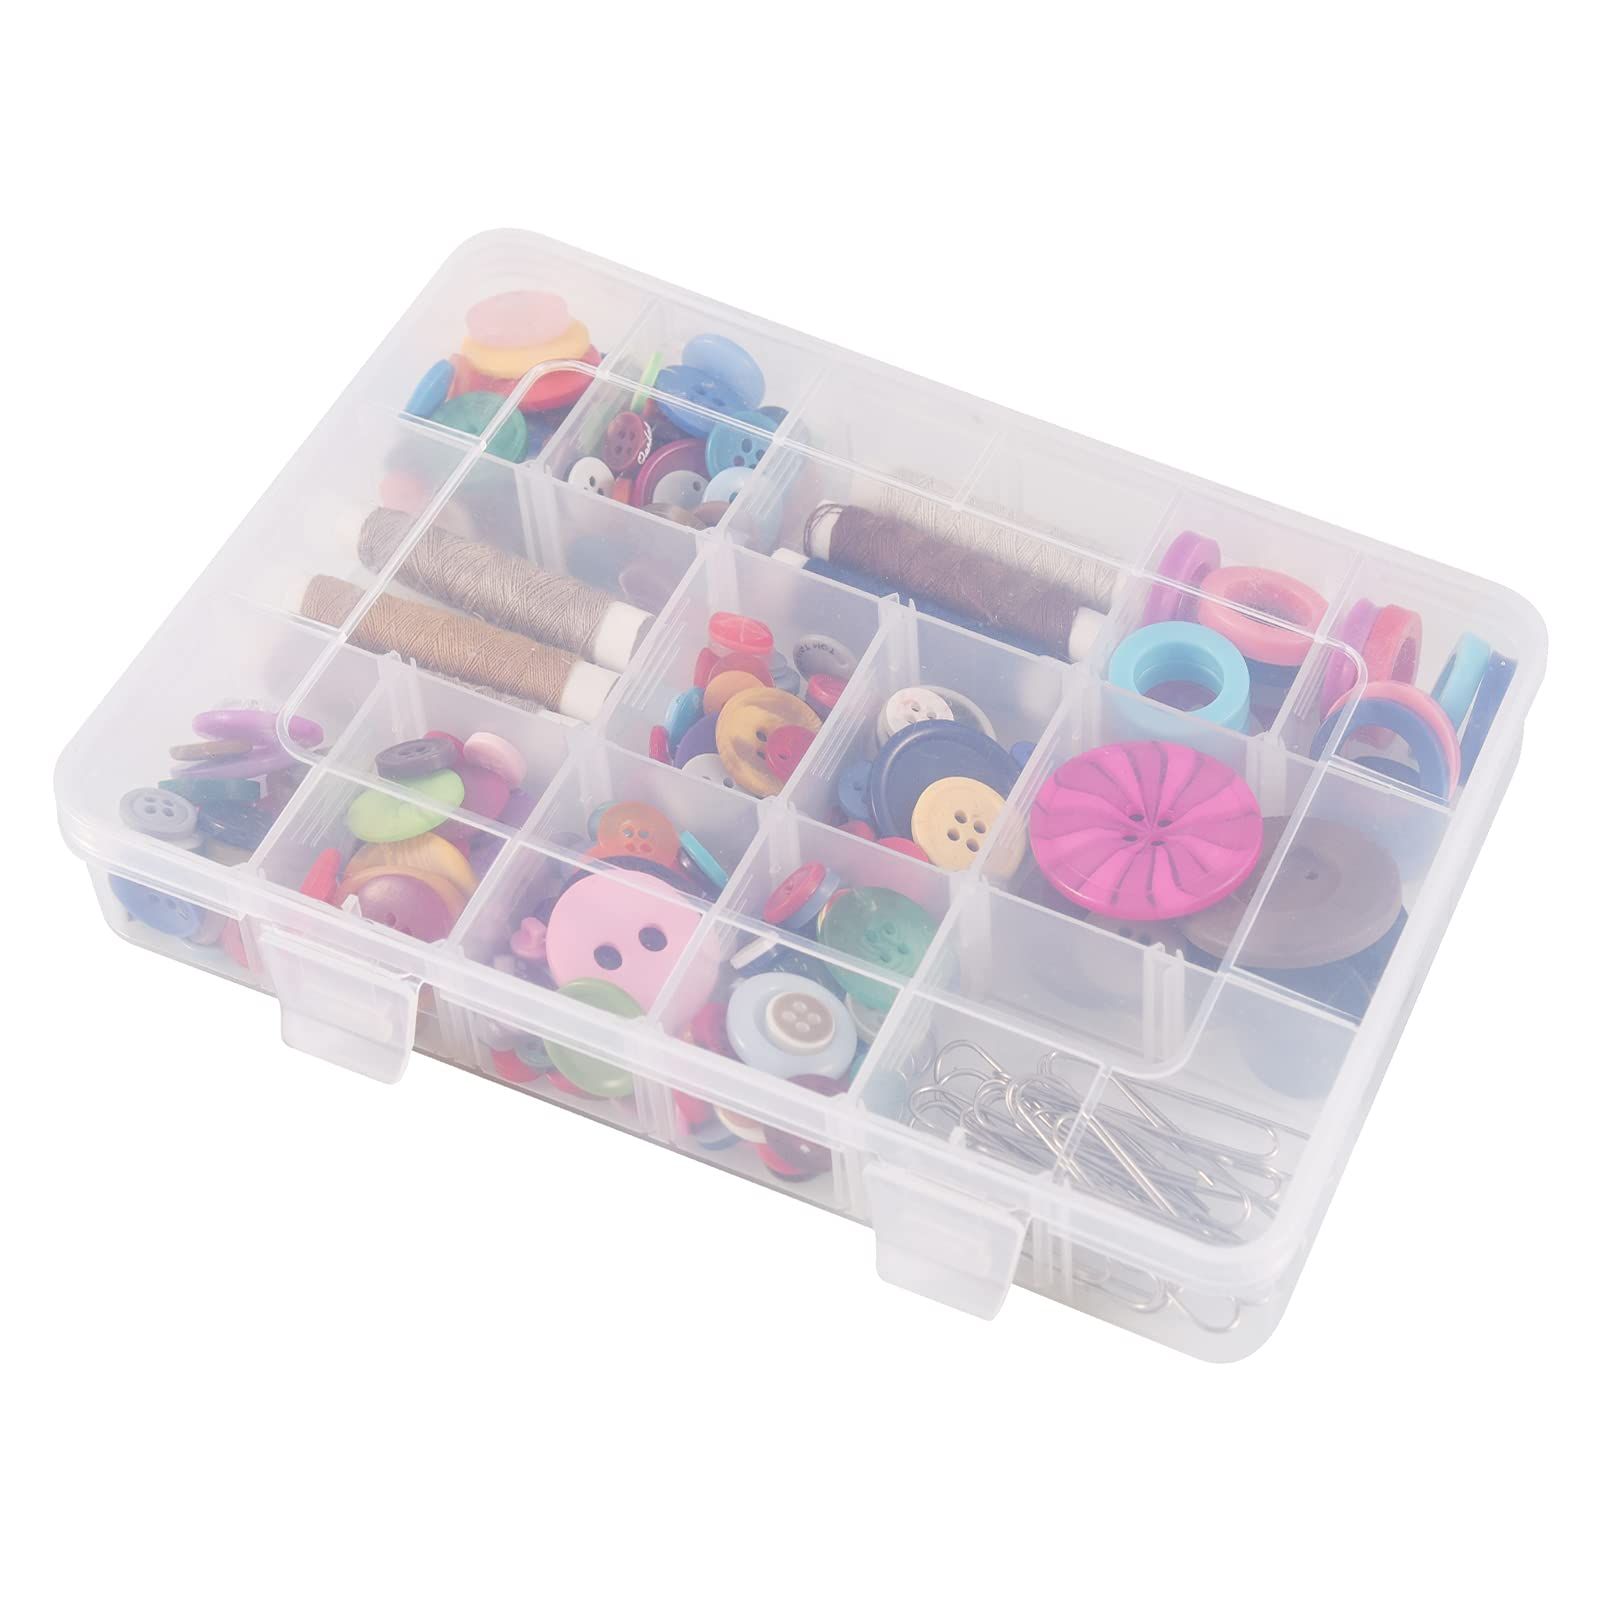 18 Grids Plastic Organizer Box with Dividers, Exptolii Clear Compartment Container Storage for Beads Crafts Jewelry Fishing Tackles, Size 7.9 x 6.2 x 1.2 in | Amazon (US)